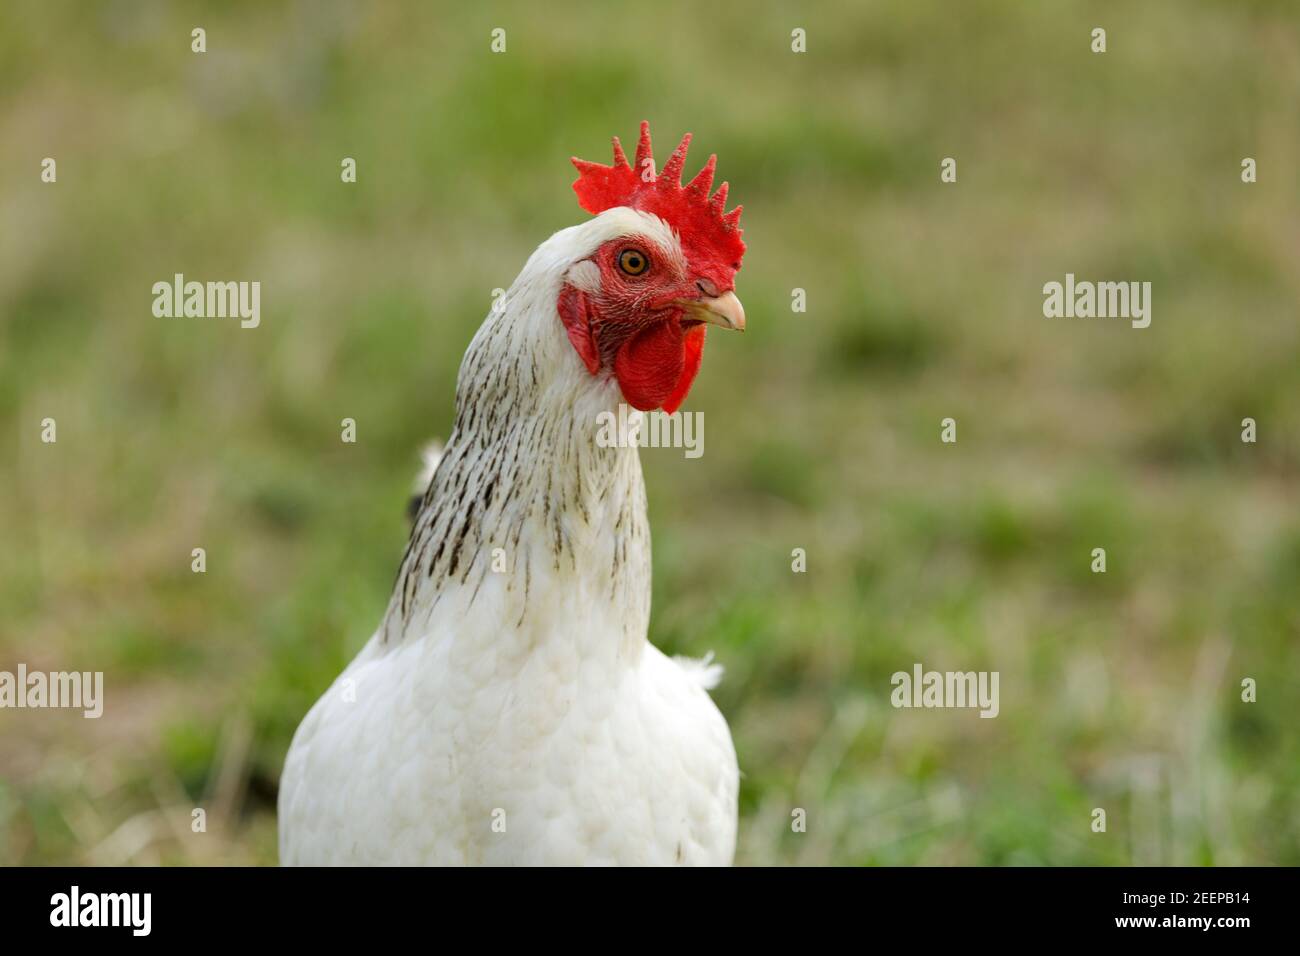 White Leghorn breed of chicken used mainly for laying  white eggs Stock Photo